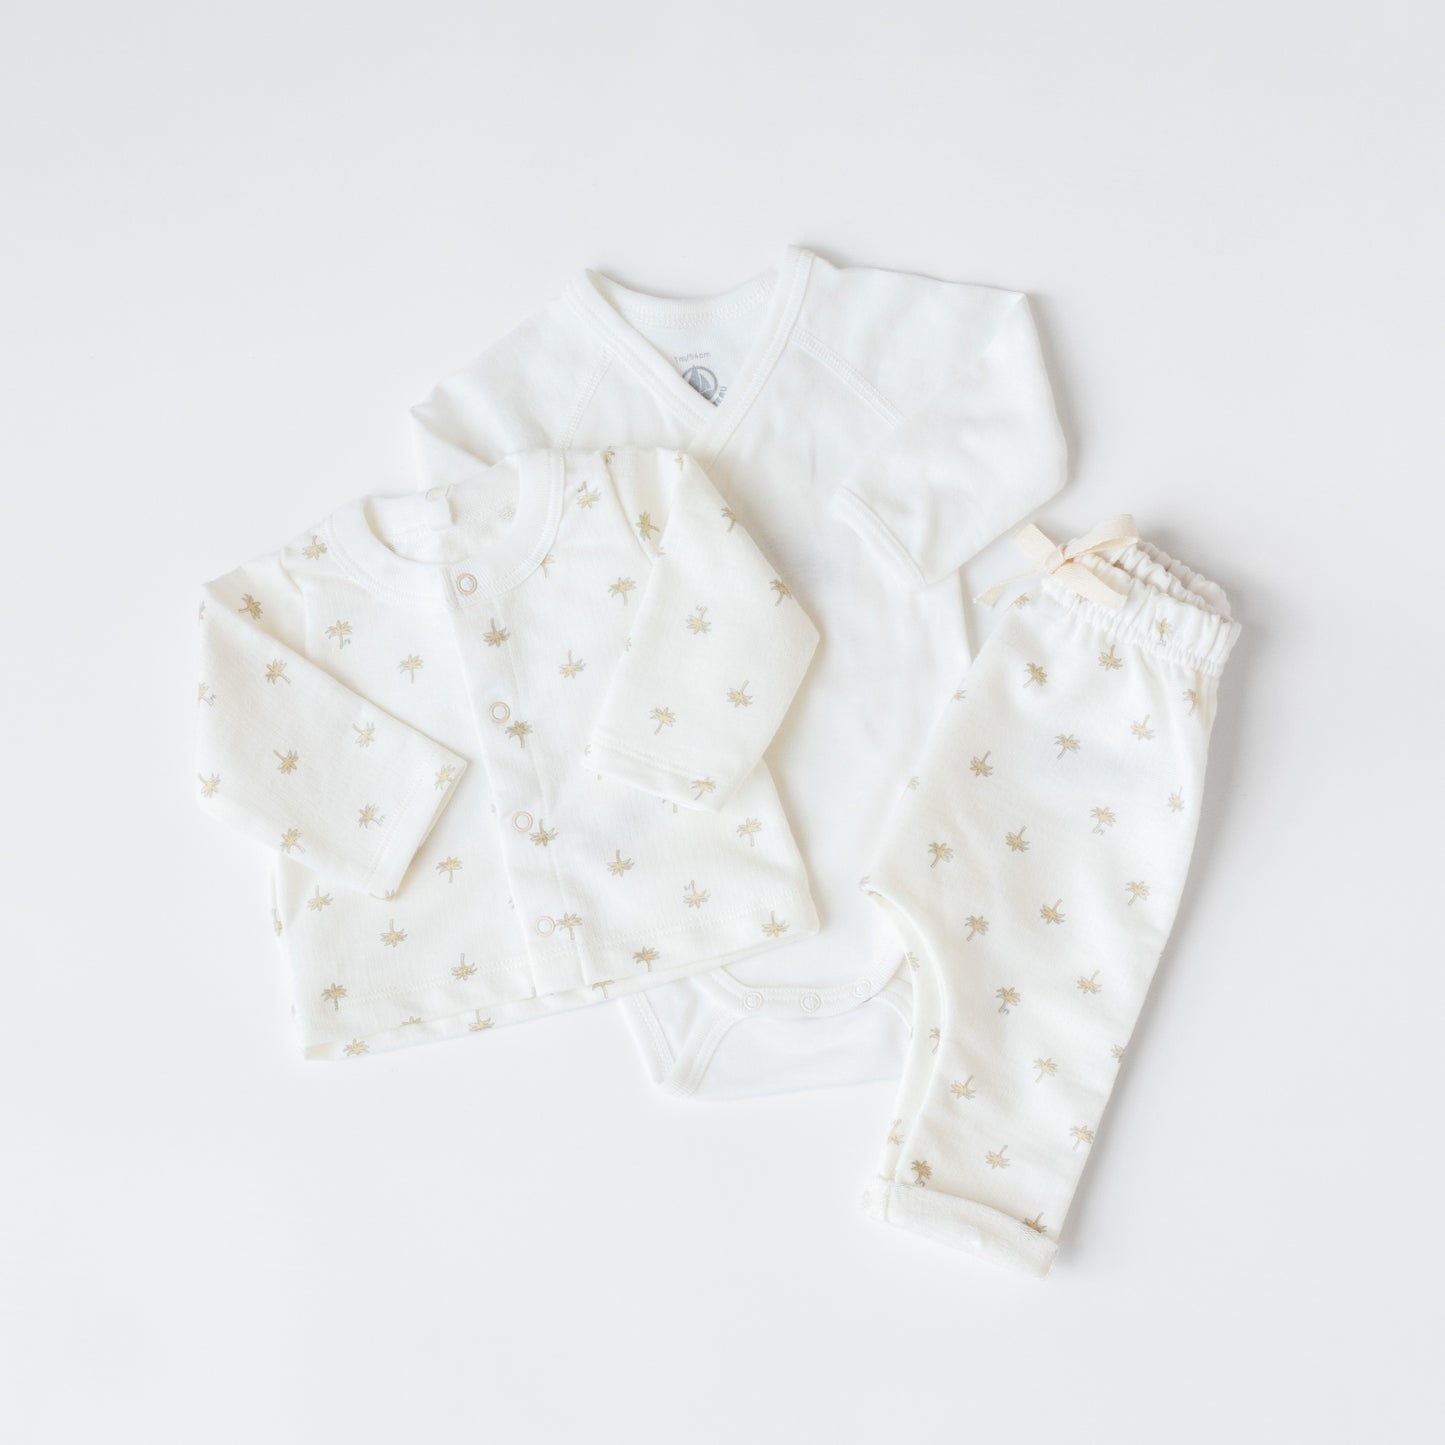 Baby Patterned Cotton Outfit Front